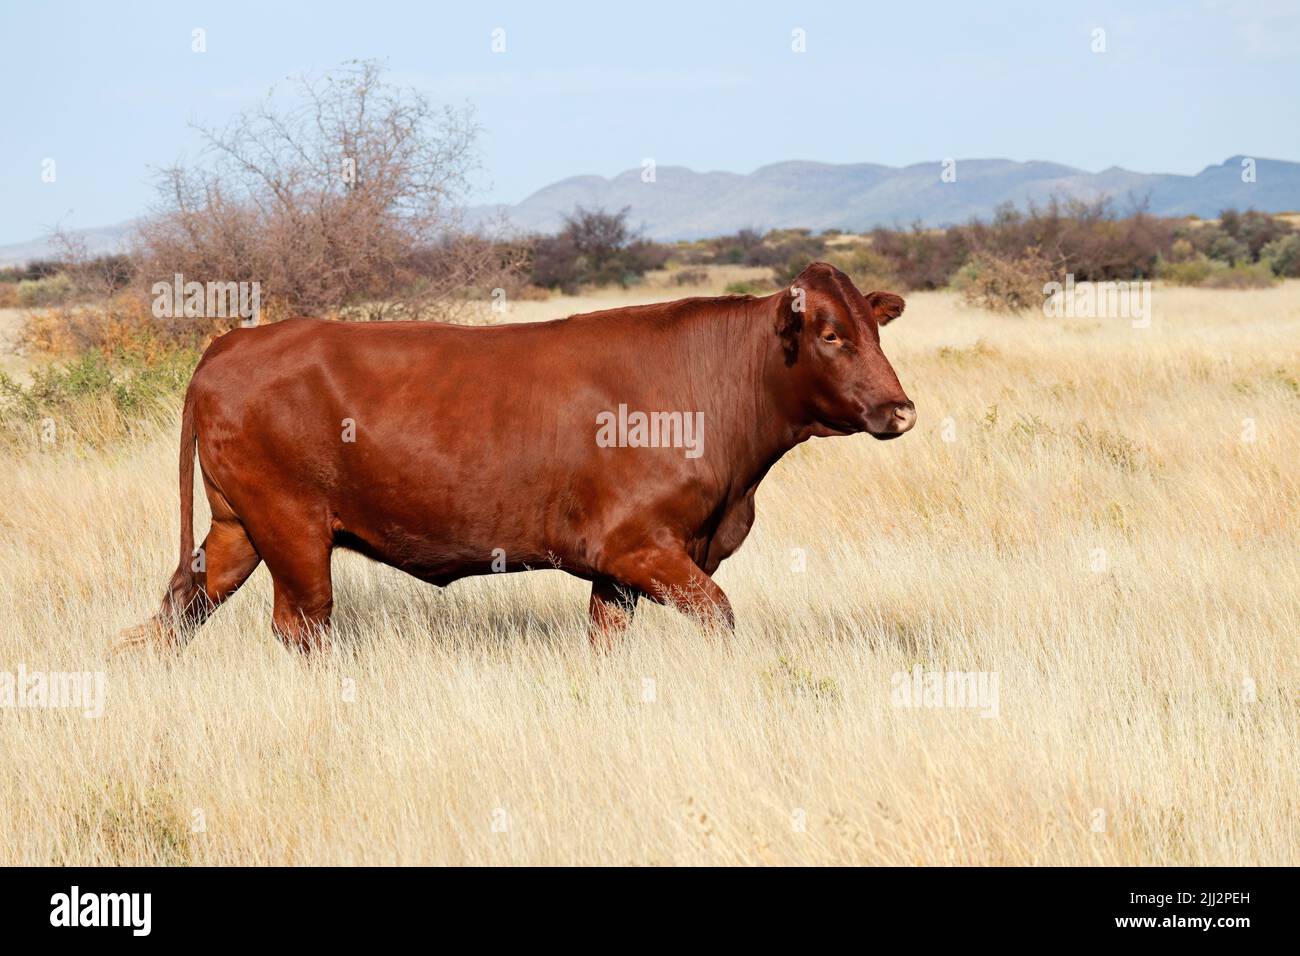 A free-range cow walking in grassland on a rural farm, South Africa Stock Photo